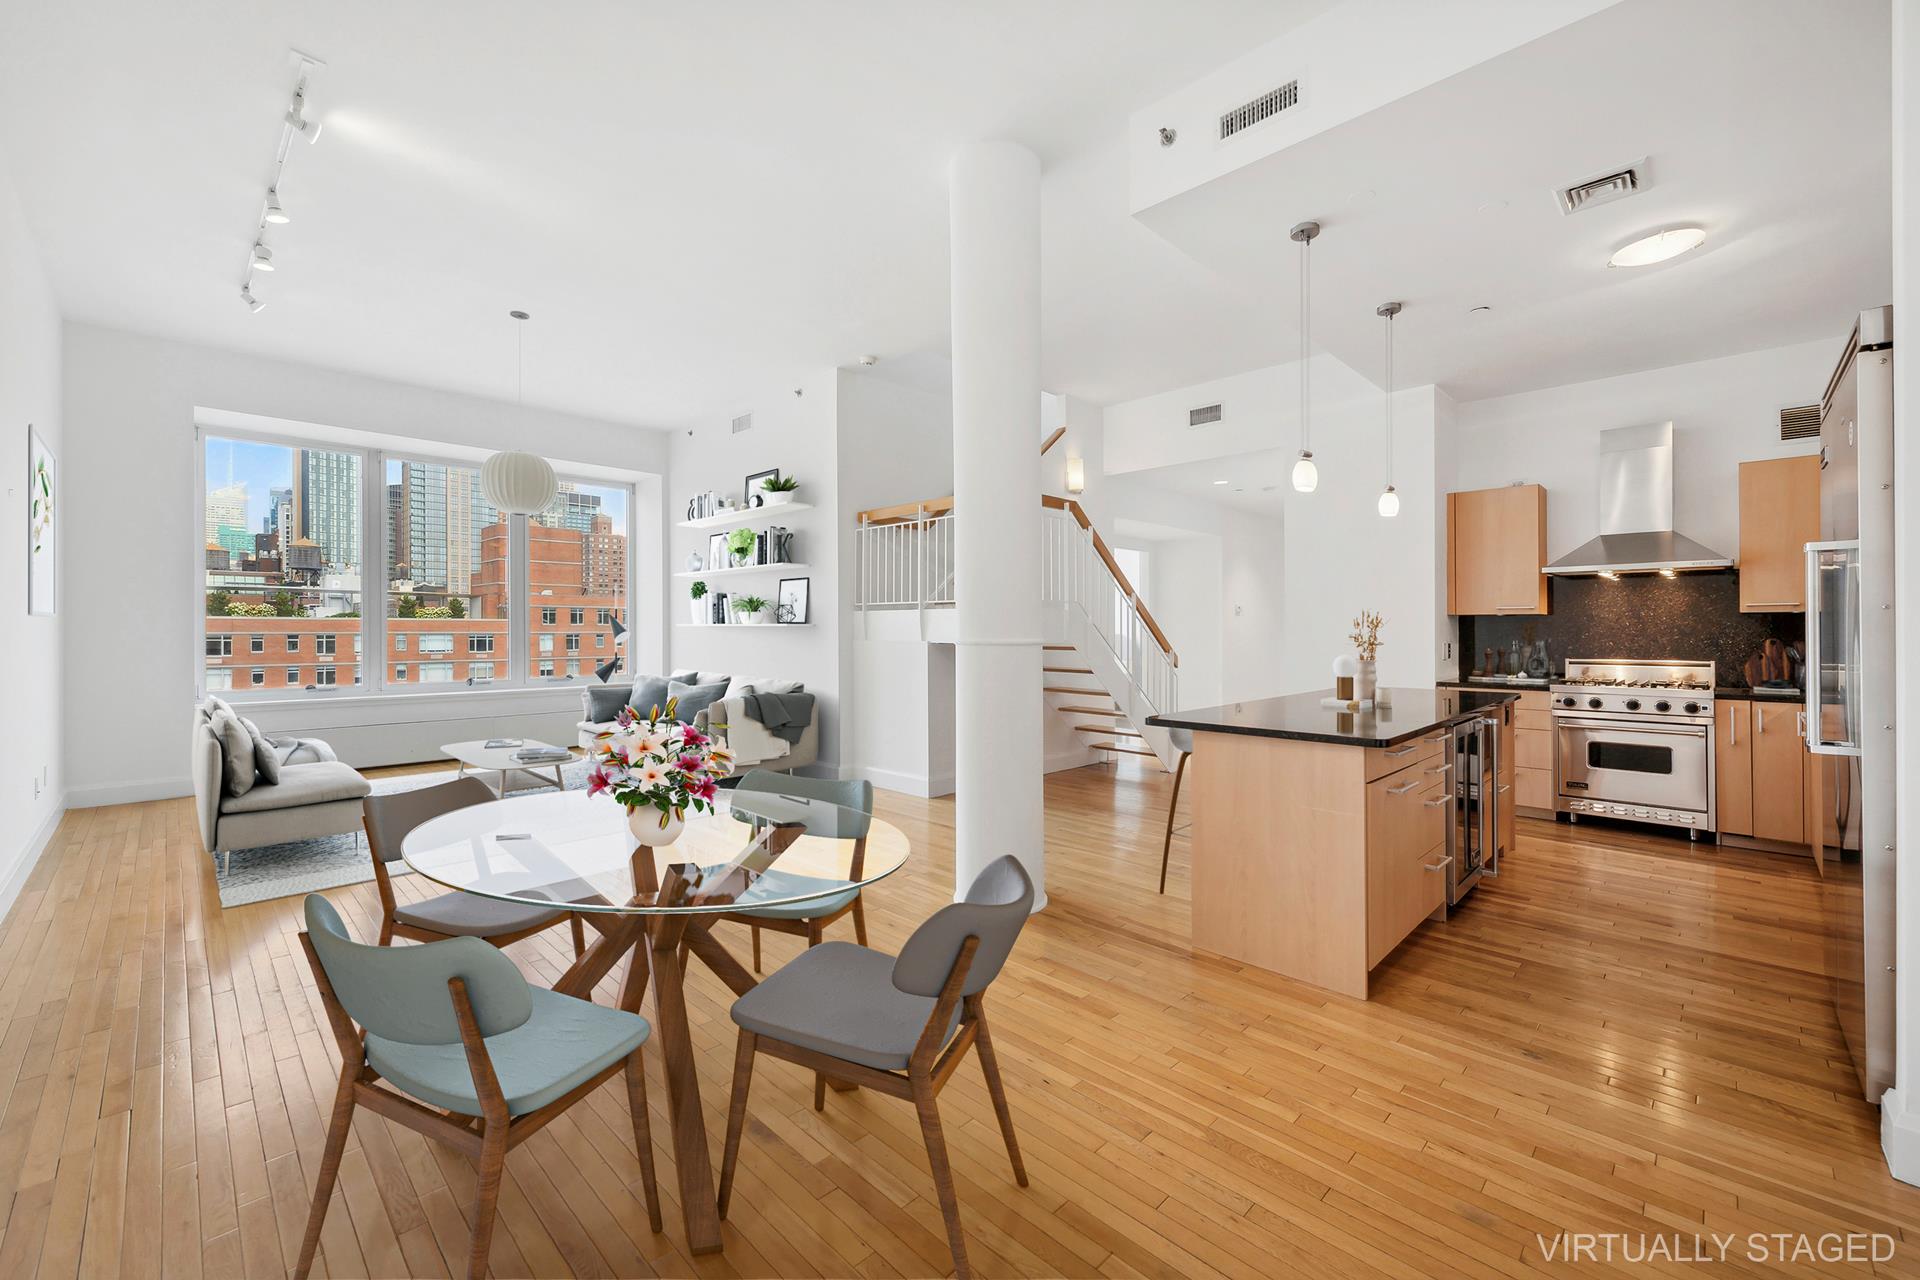 121 West 19th Street Phf, Chelsea, Downtown, NYC - 4 Bedrooms  
3.5 Bathrooms  
8 Rooms - 